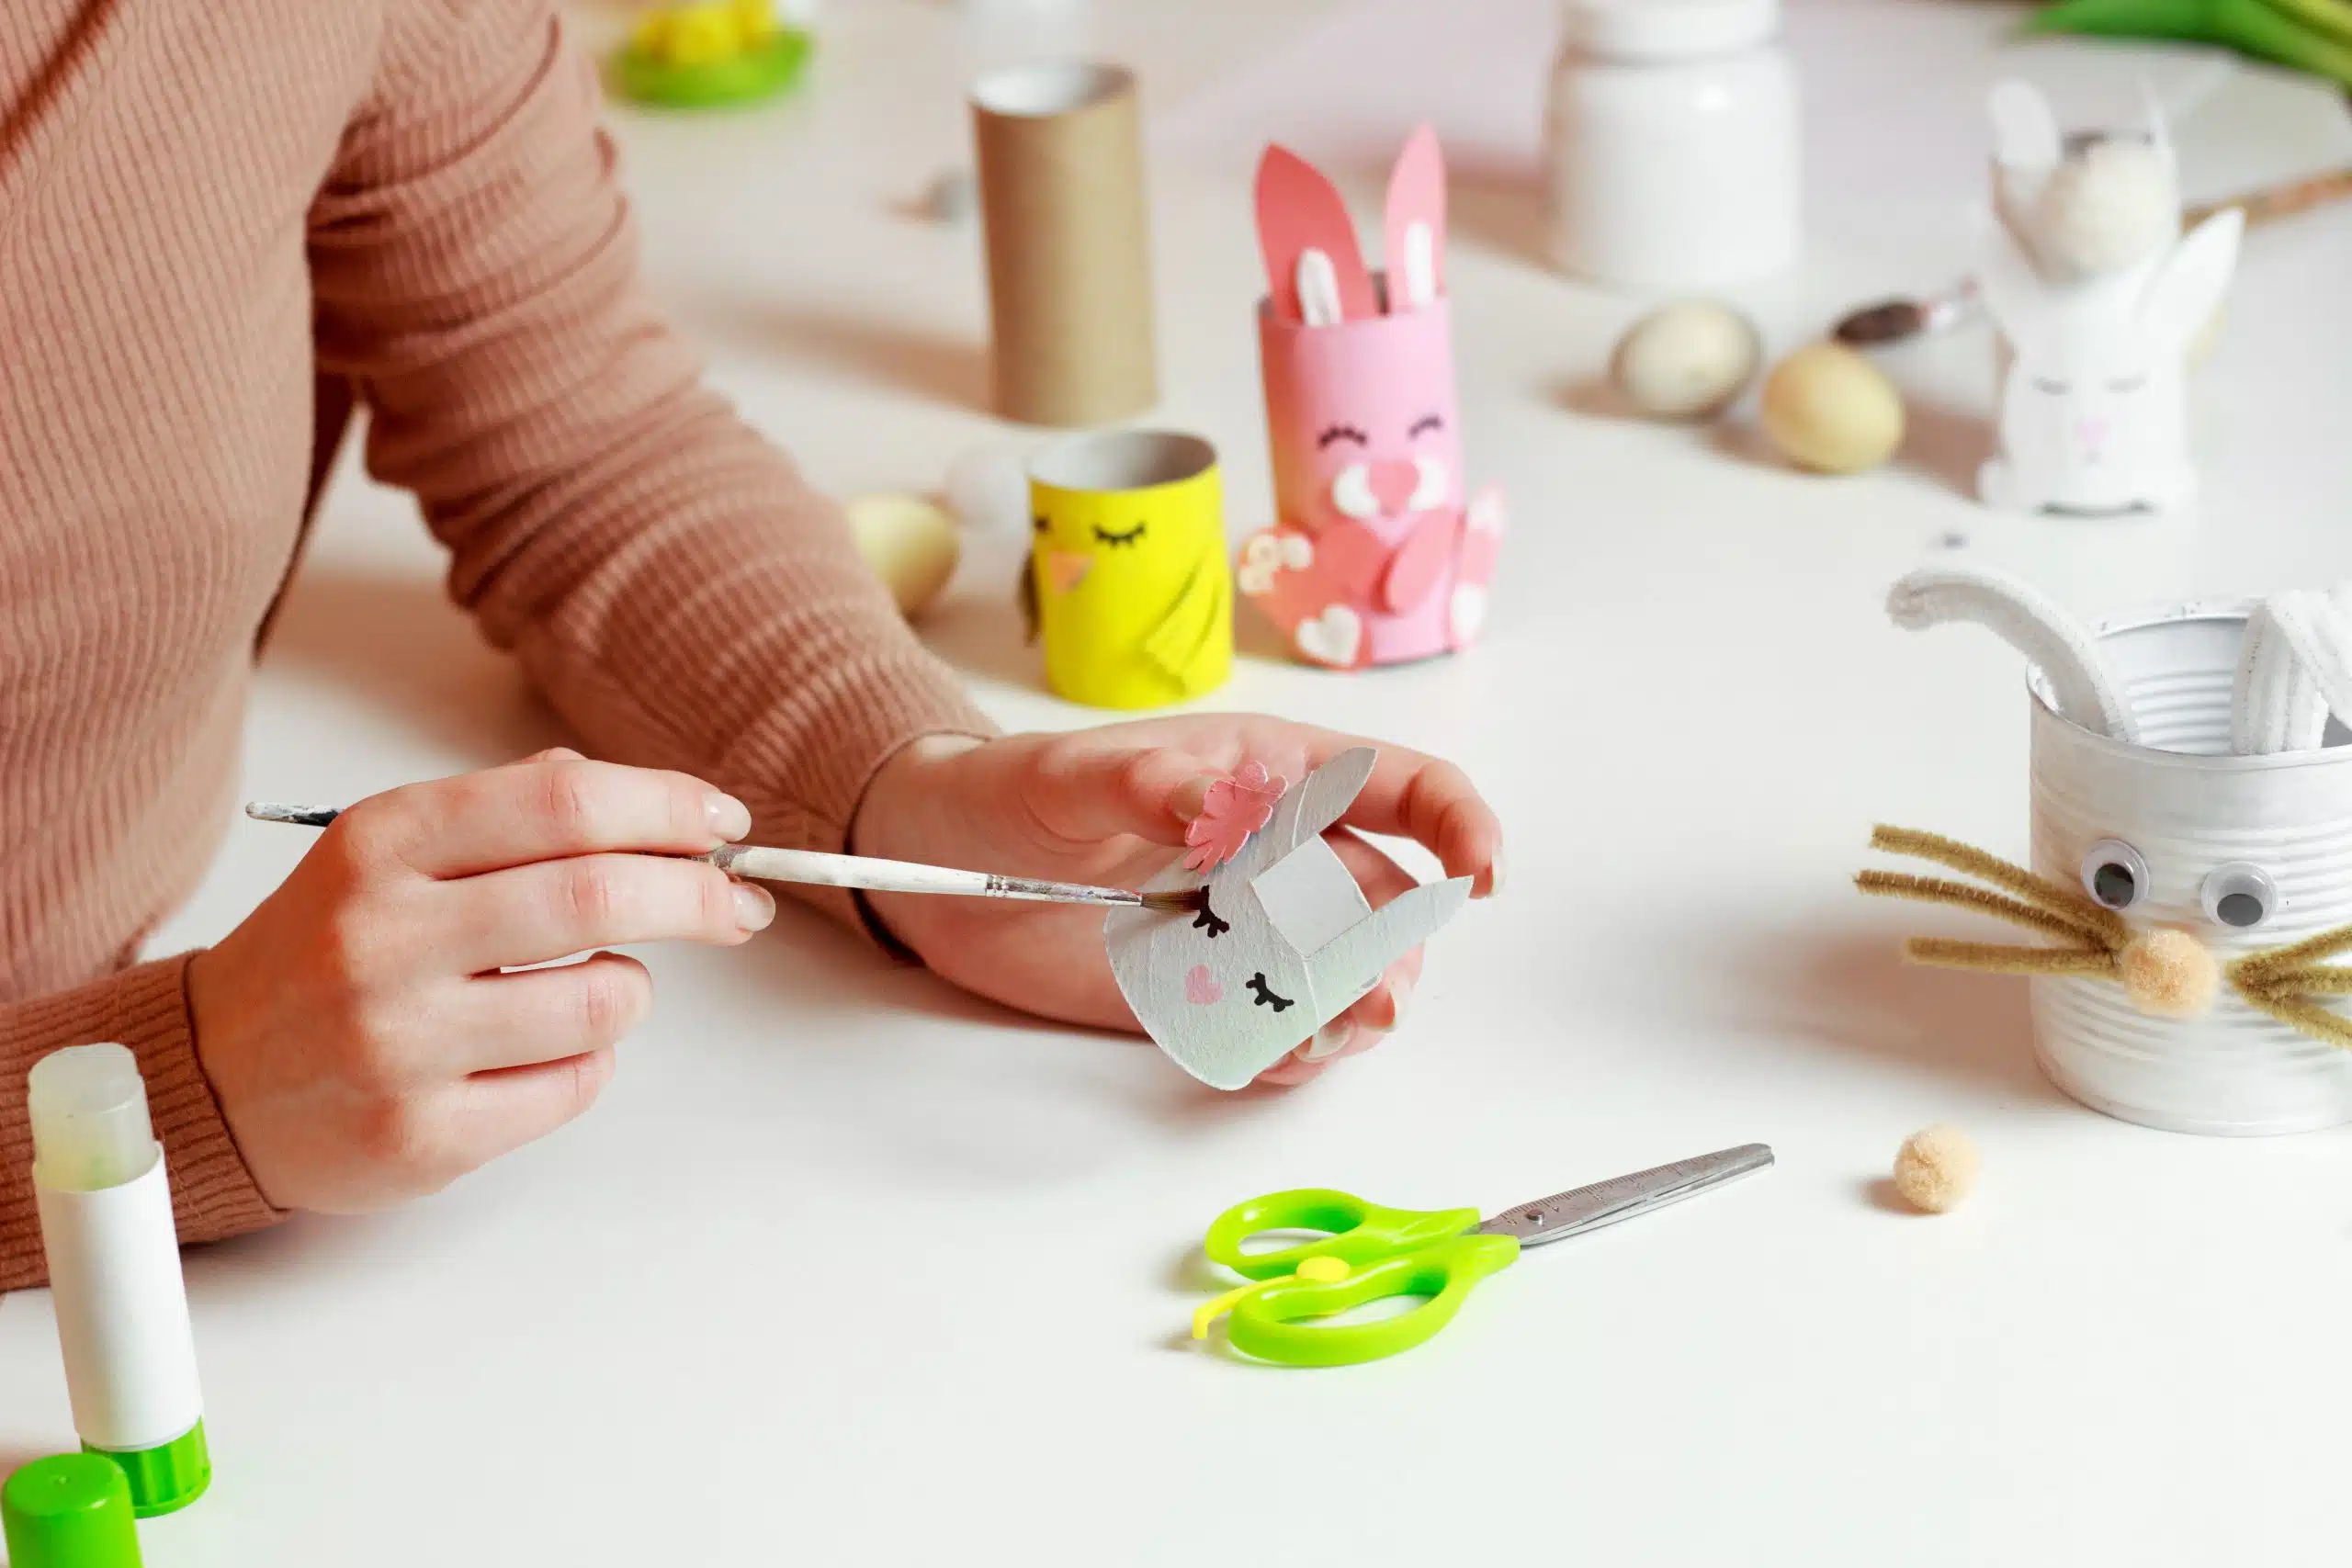 Reuse concept art from toilet tube. Eco friendly bunny craft. Handmade decoration easter rabbit. Kids DIY ideas.